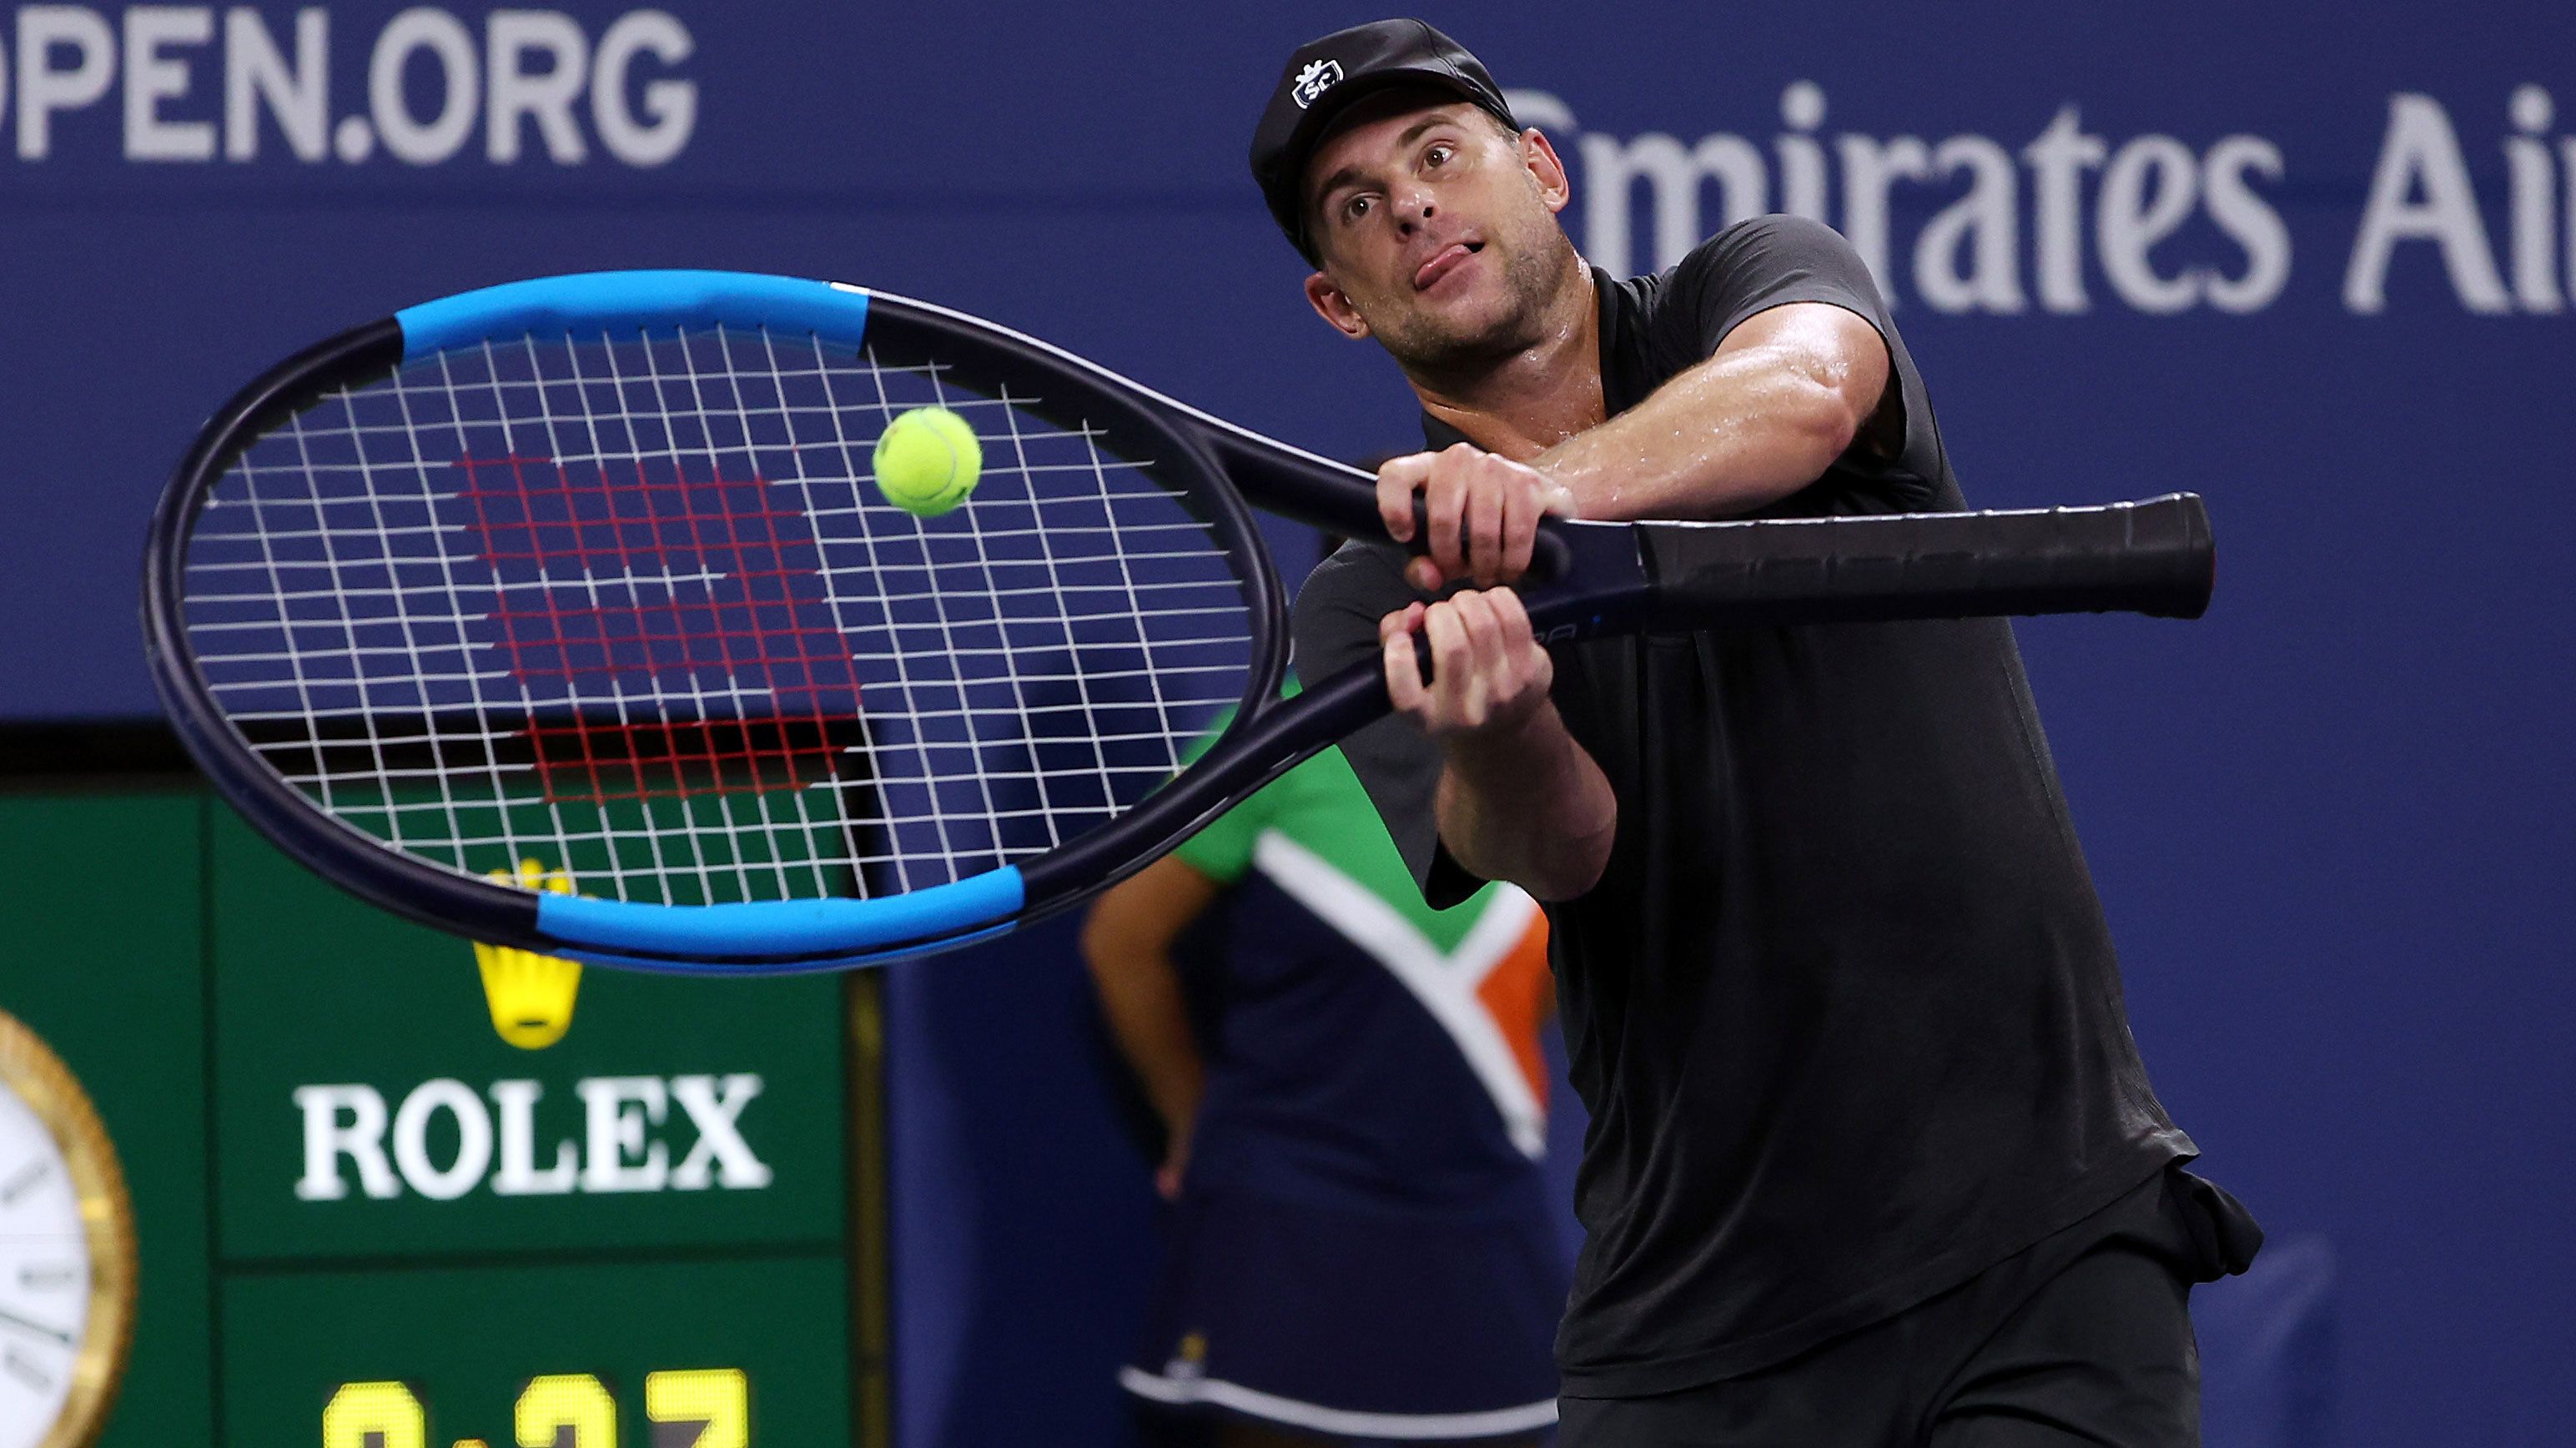 Andy Roddick uses an oversize racquet during a US Open Legends match against James Blake and Bethanie Mattek-Sands in 2022.